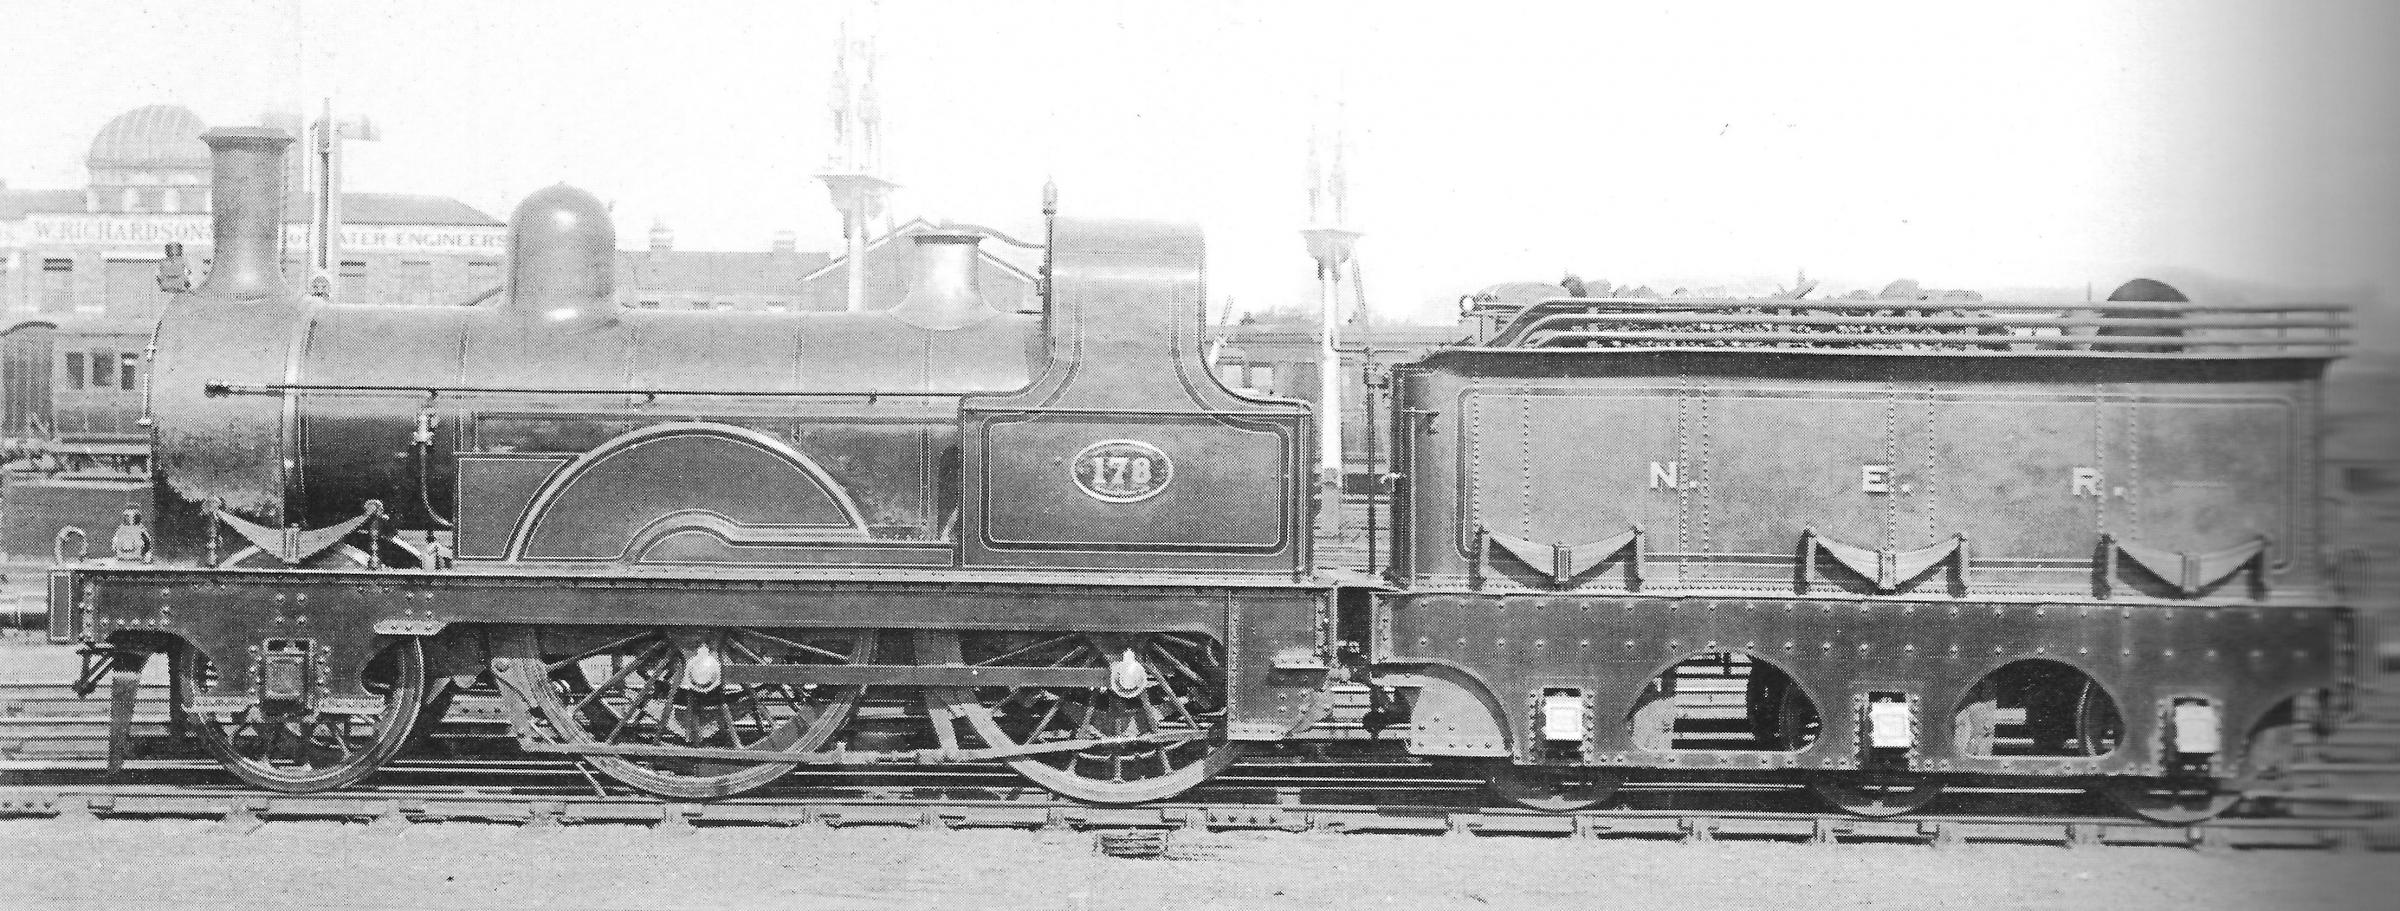 NER No 178 standing at Darlingtons Bank Top station. It was involved in the Thirsk crash of November 2, 1892, and the brass ornament was made out of its damaged pipes when it was undergoing repairs at North Road shops